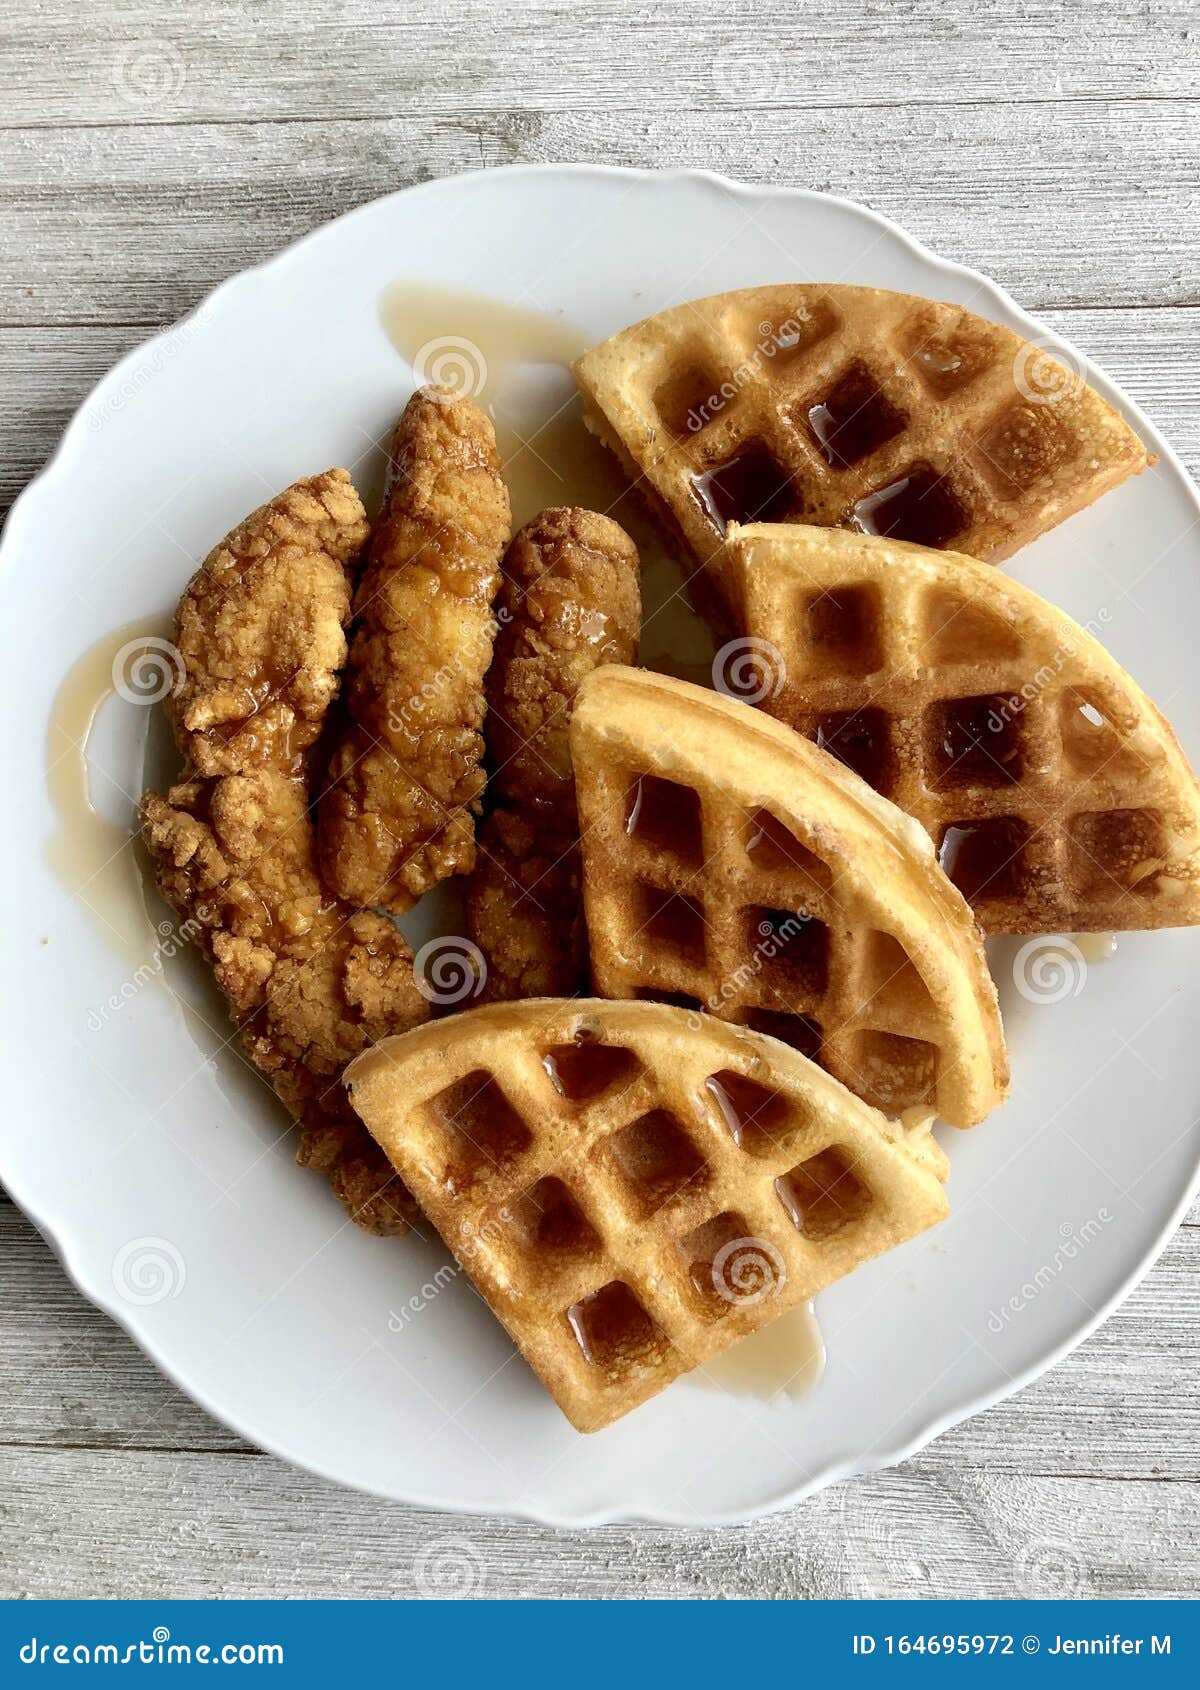 Chicken And Waffles On A White Plate Stock Photo Image Of American Belgian